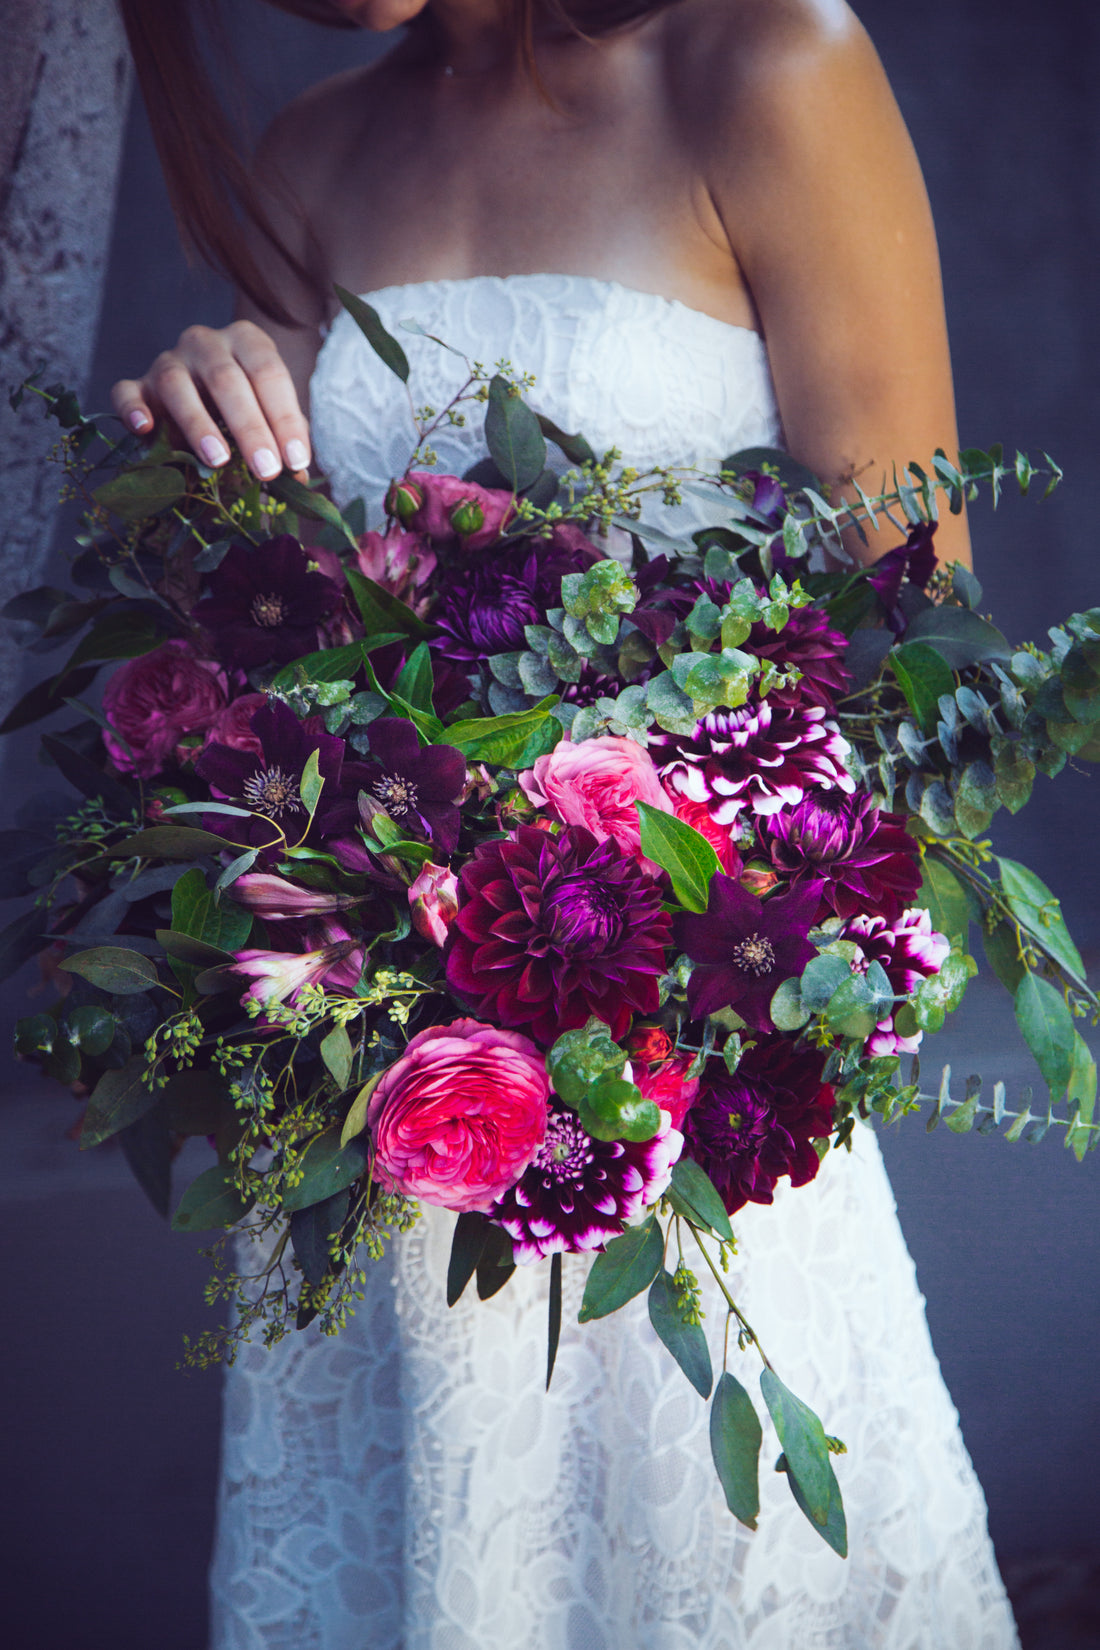 How to Choose Your Wedding Flower Bouquet? 6 Must-Know Things